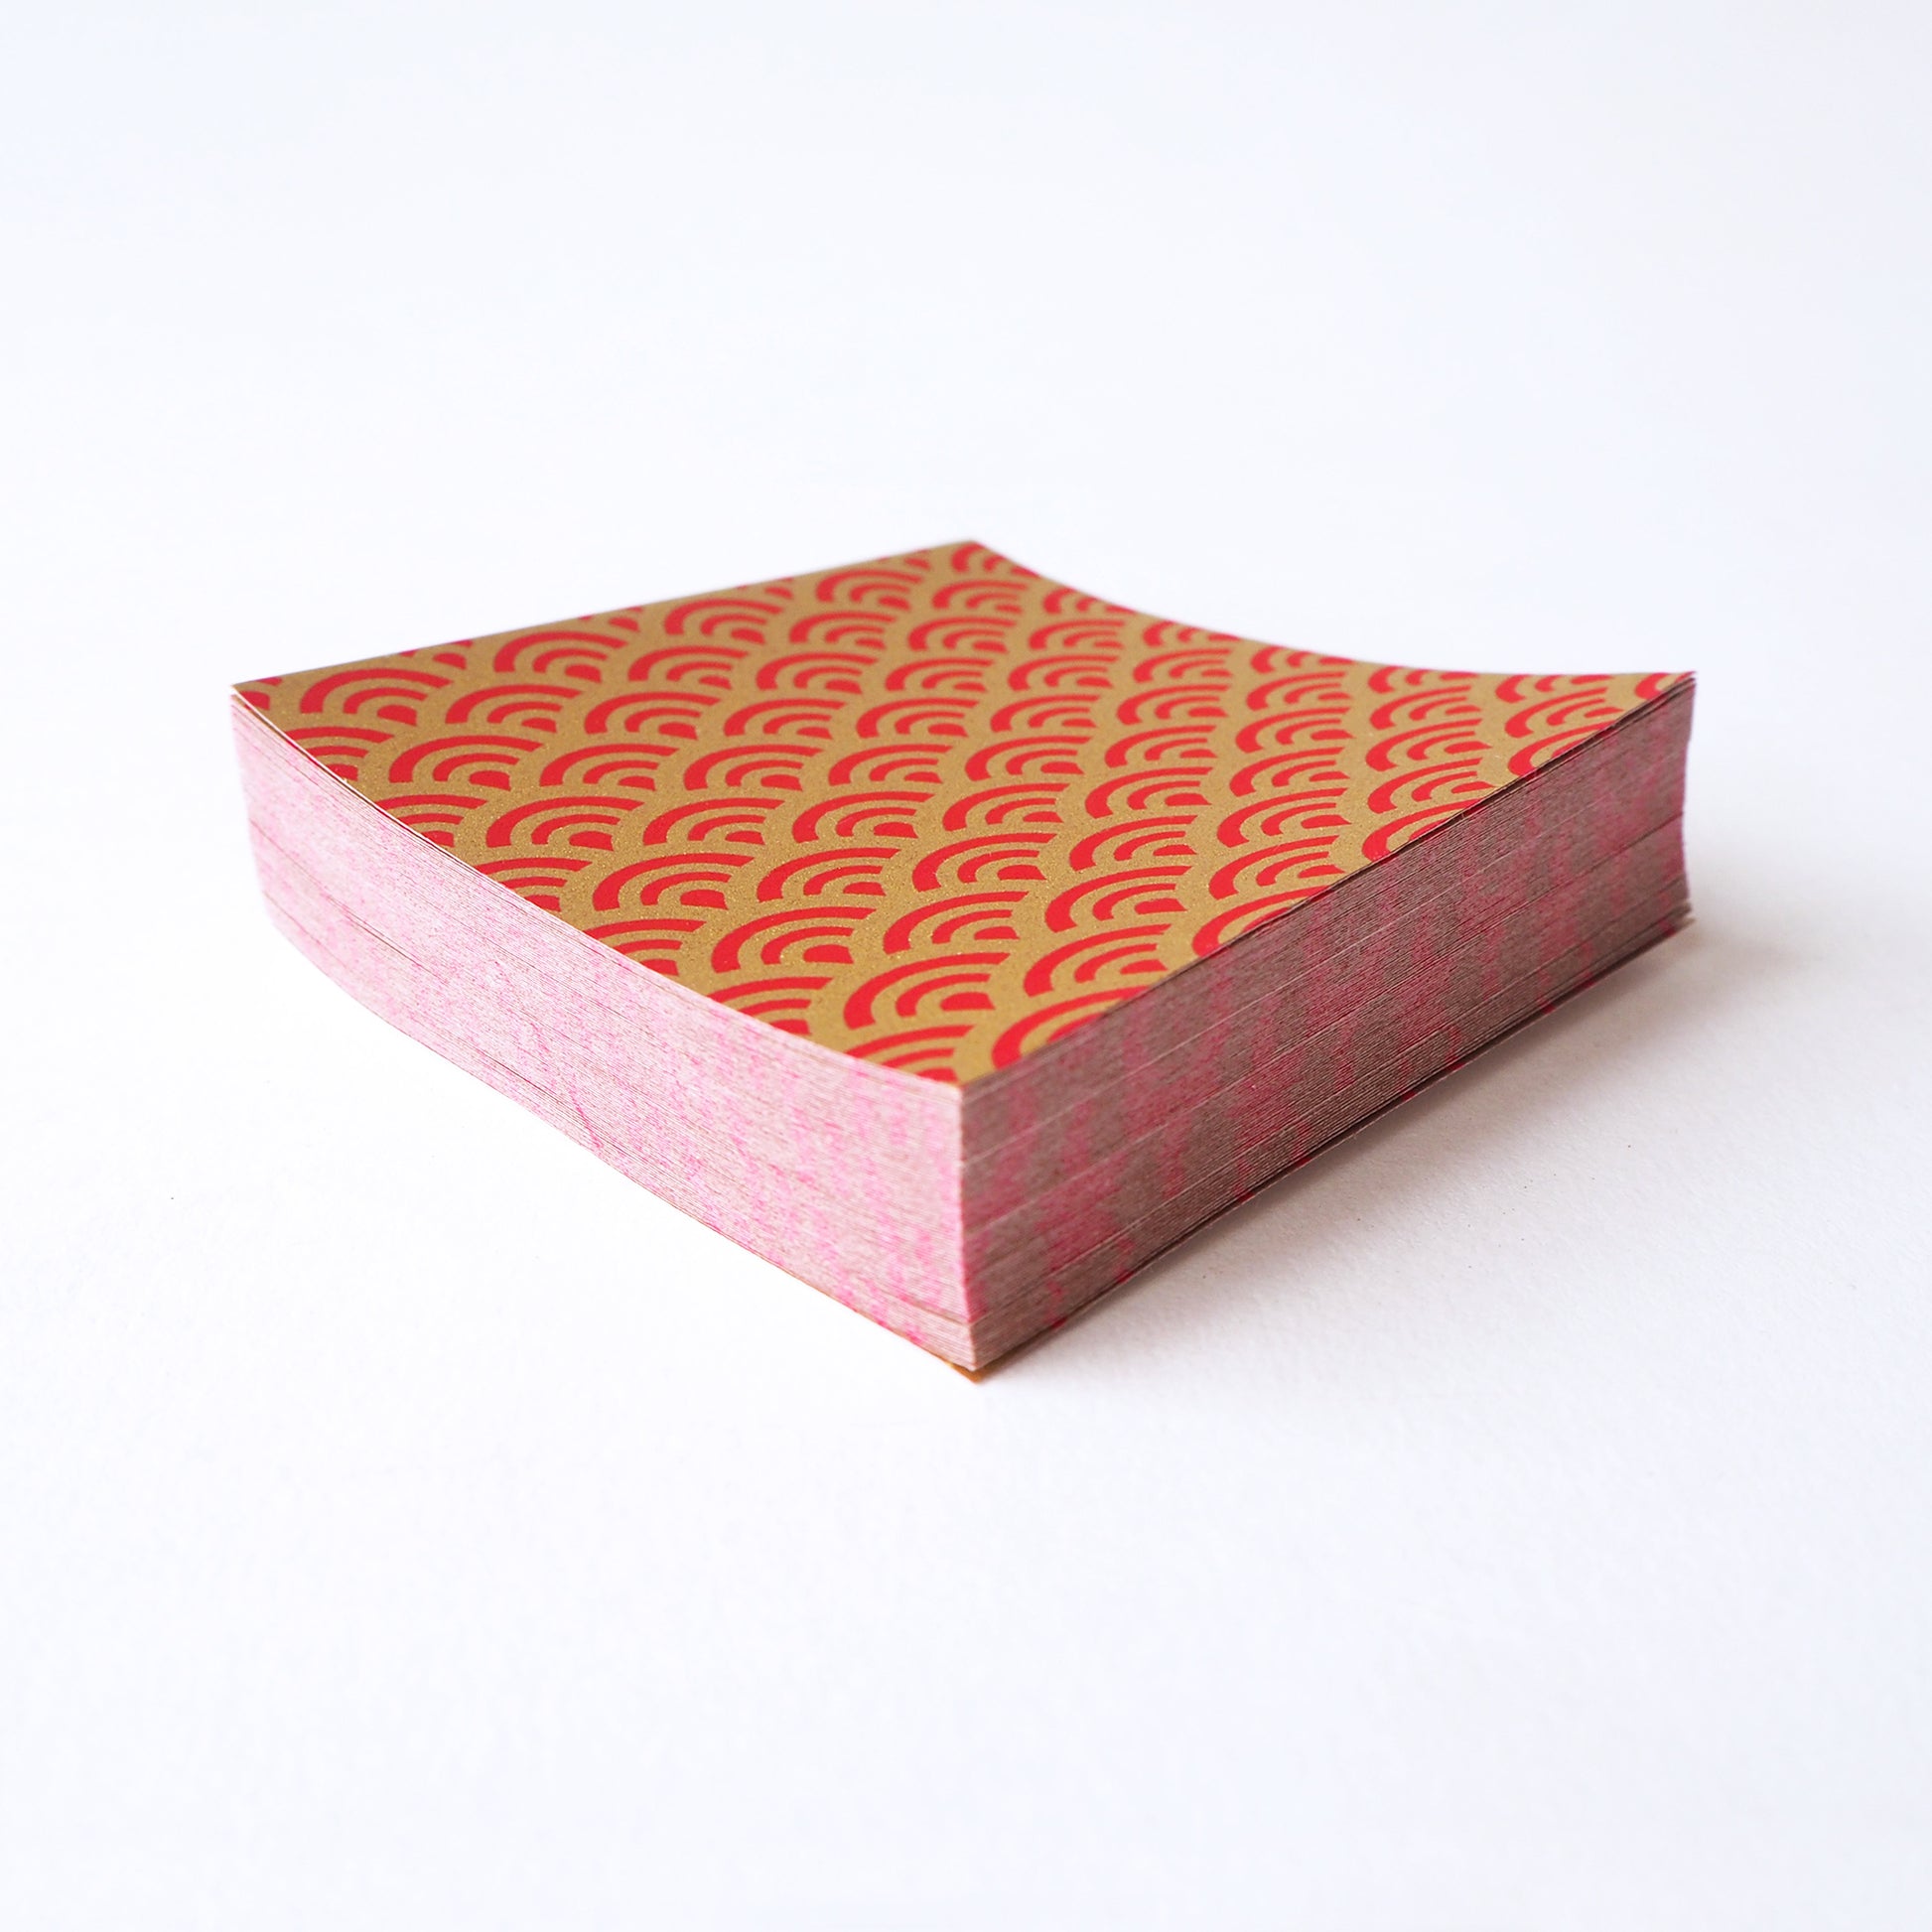 Pack of 100 Sheets 7x7cm Yuzen Washi Origami Paper  HZ-055 - Sea Waves Red Gold - washi paper - Lavender Home London